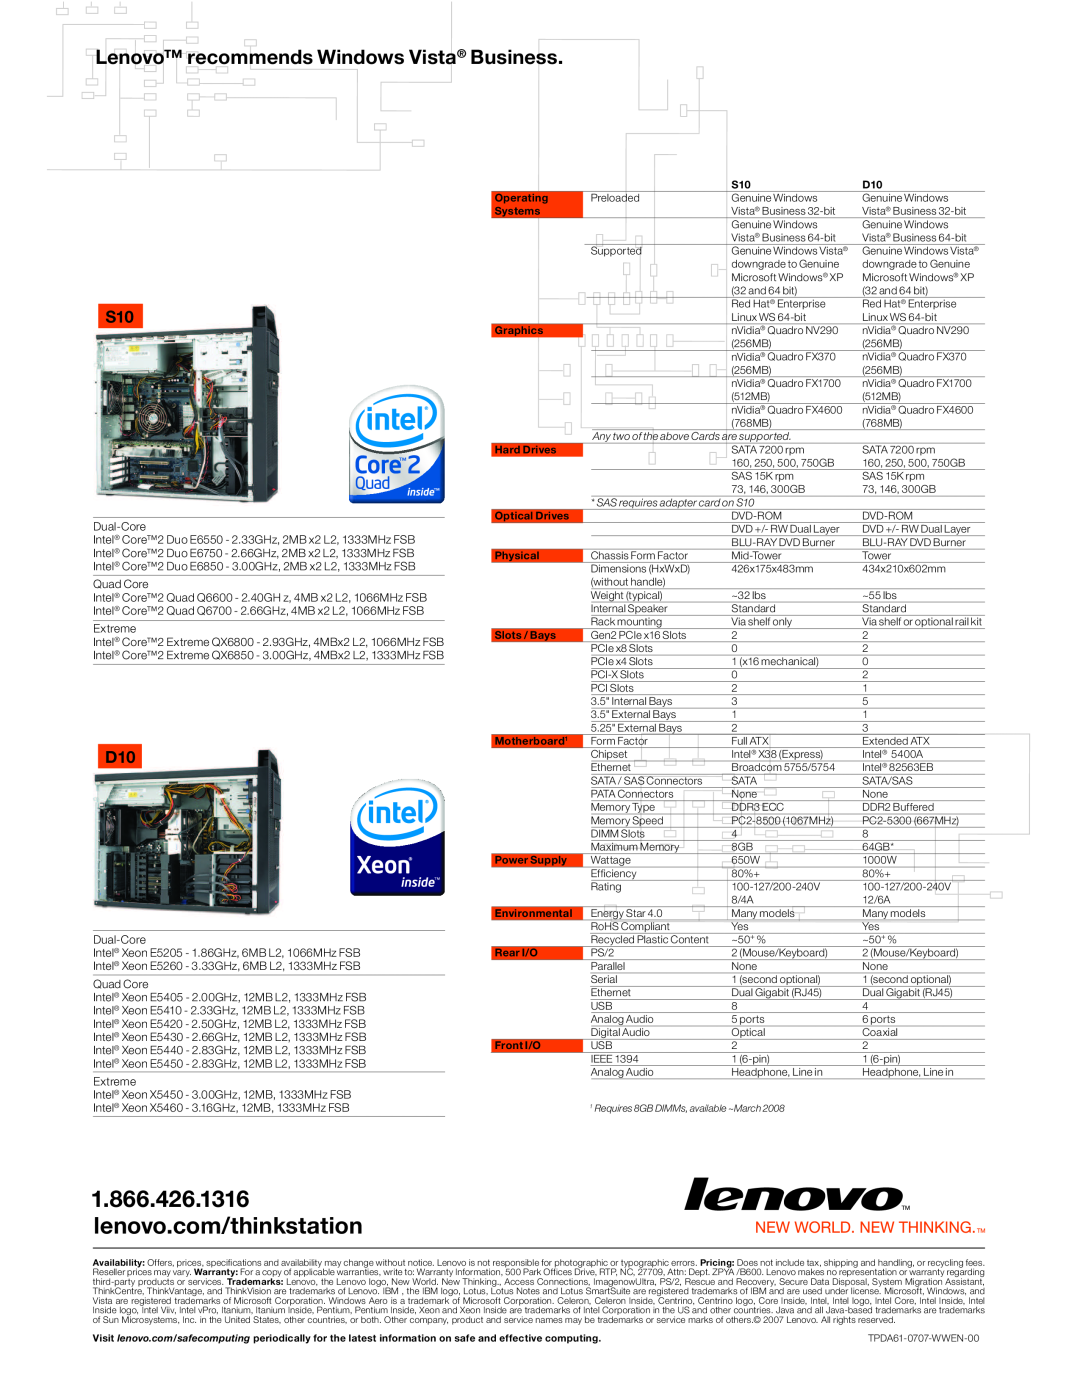 Lenovo S10 manual Lenovo recommends Windows Vista Business, Any two of the above Cards are supported 